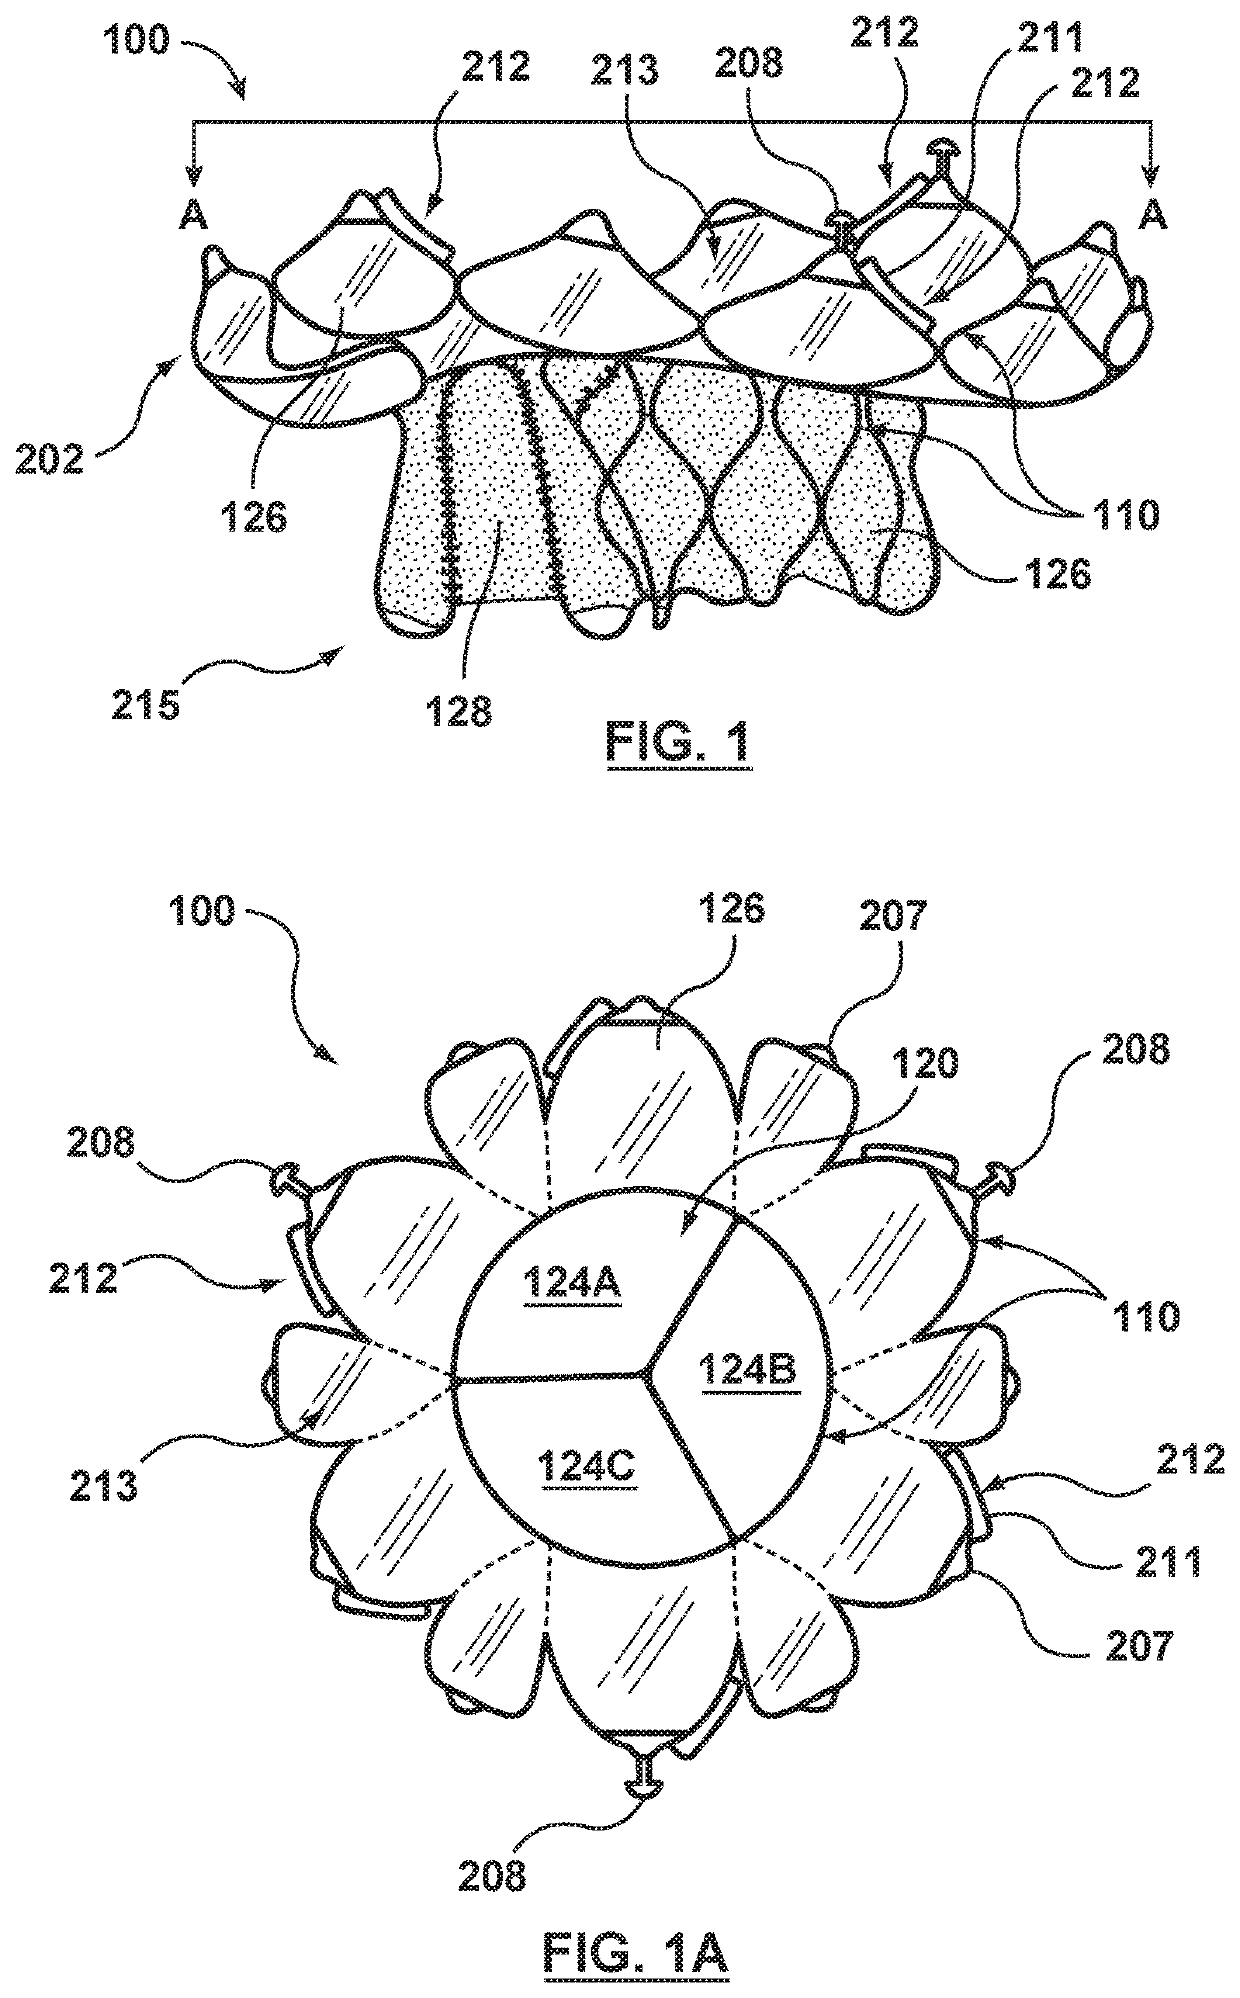 Methods for anchoring a heart valve prosthesis in a transcatheter valve implantation procedure